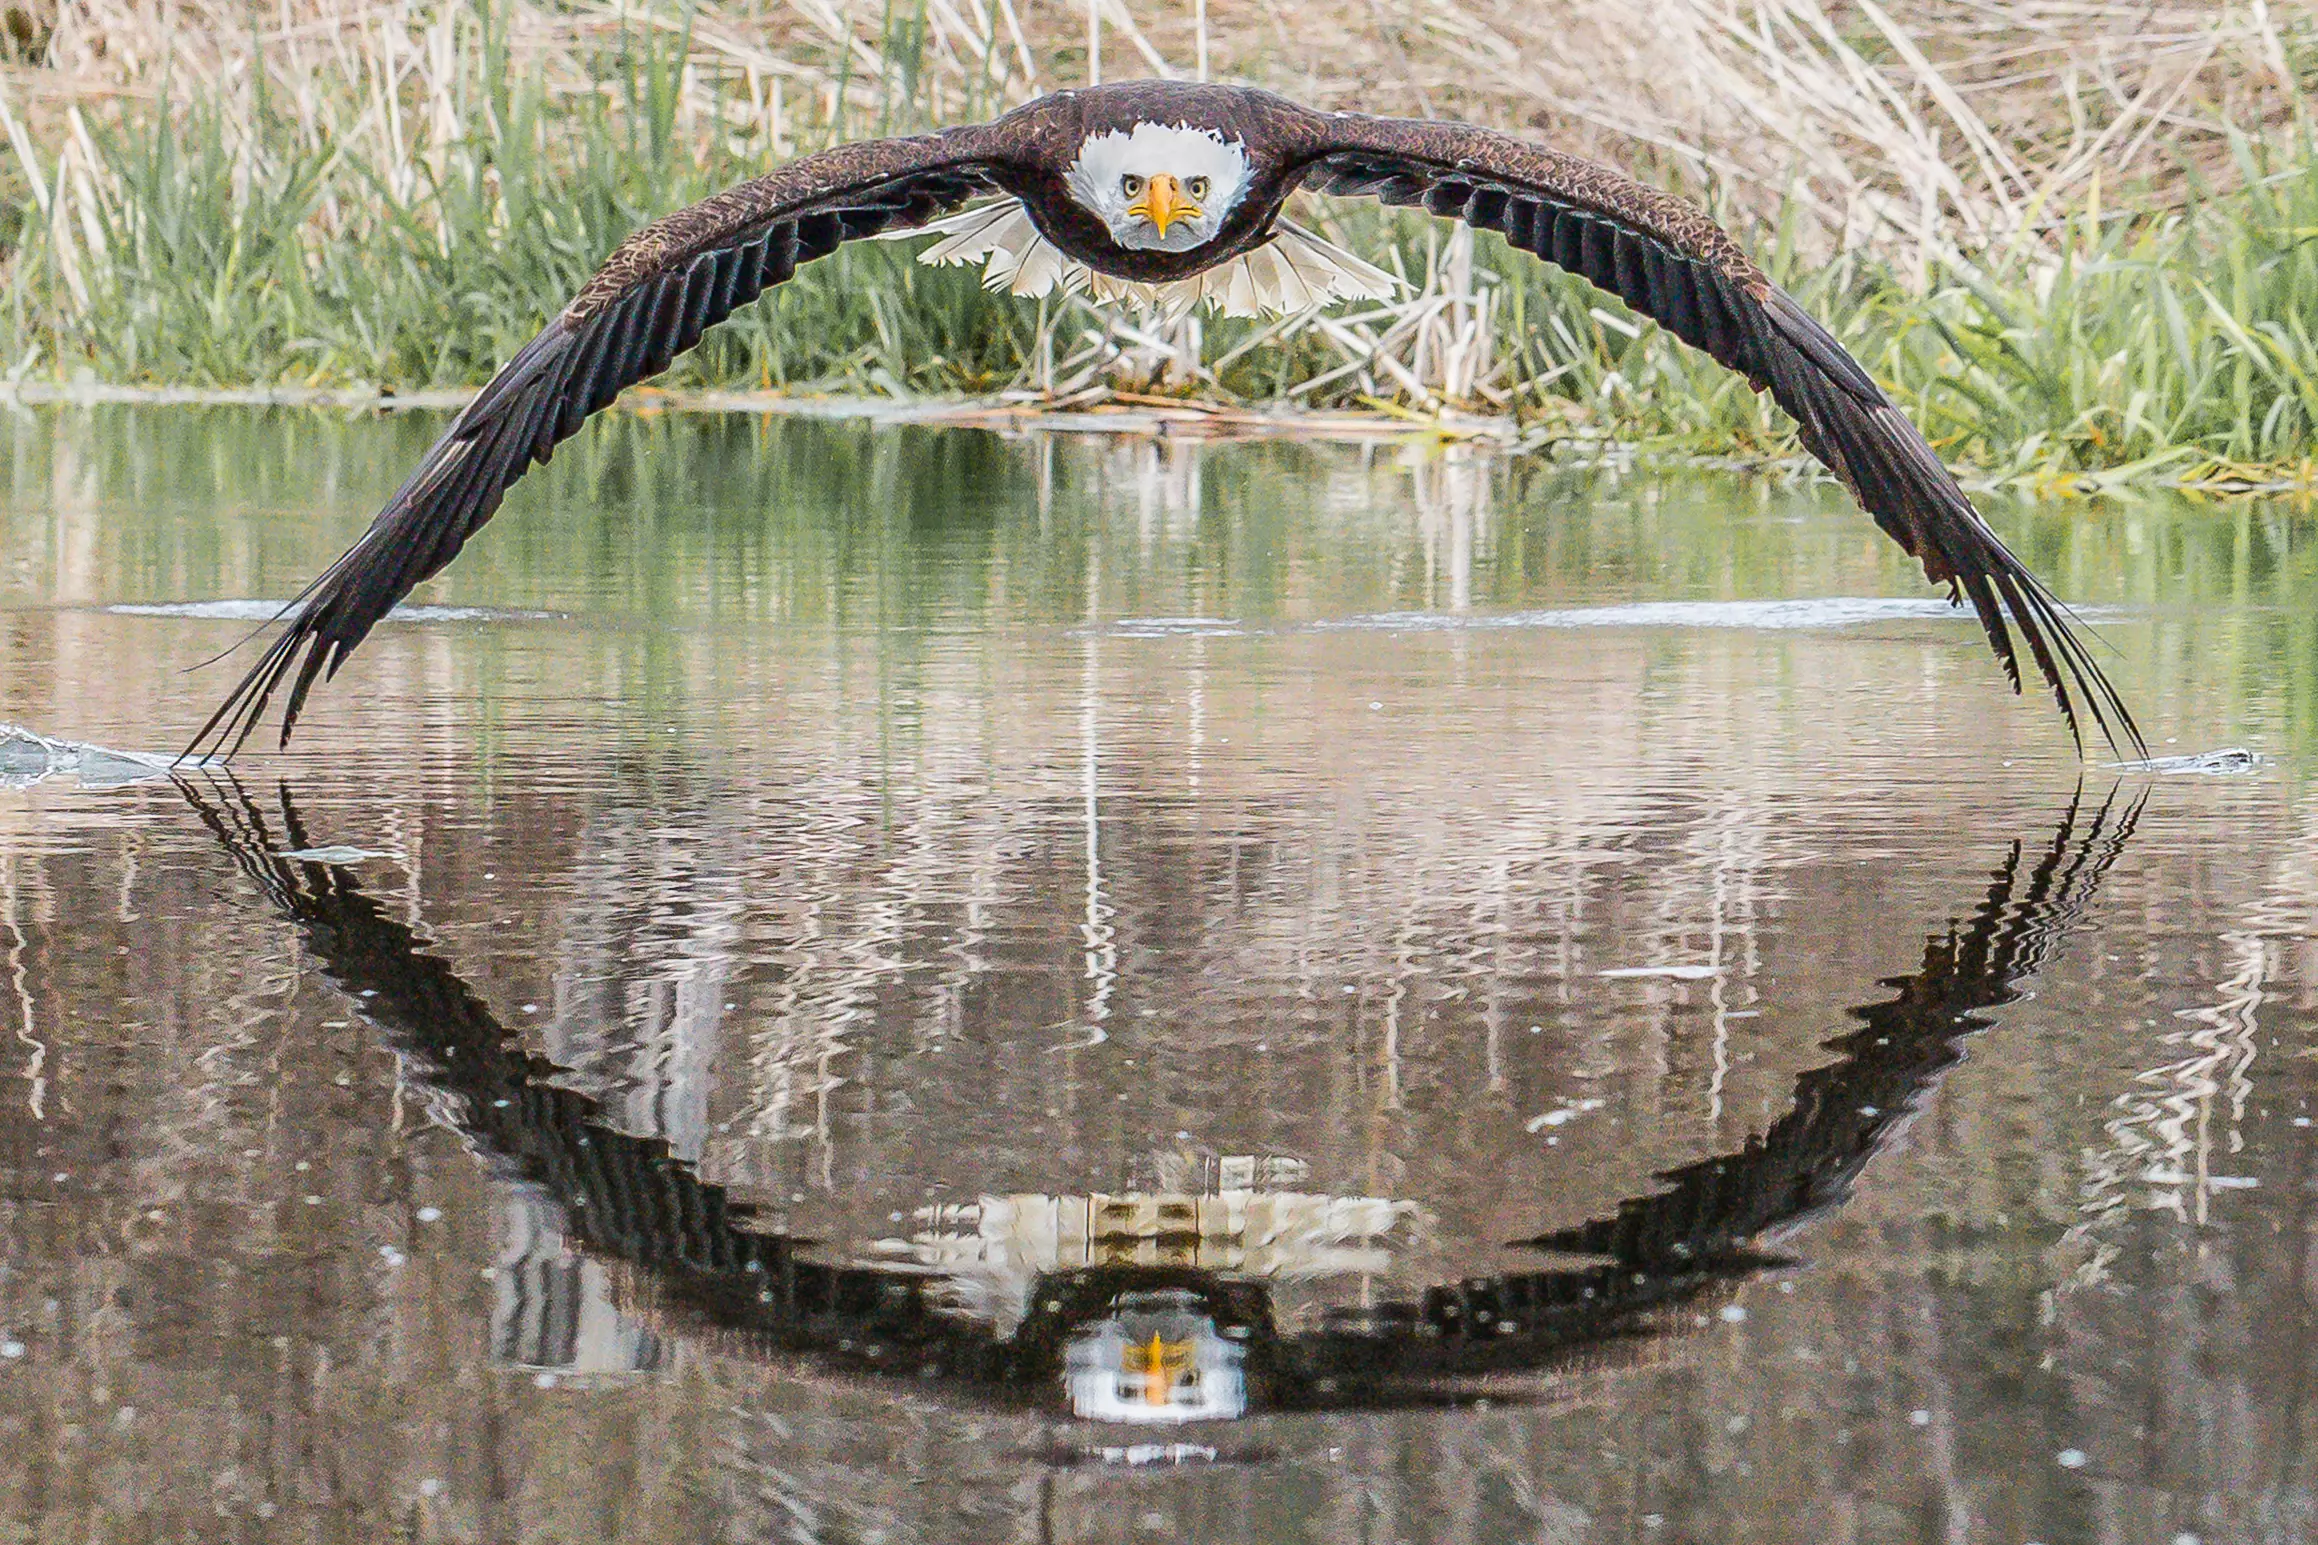 The photographer managed to capture the eagle's picture perfectly.